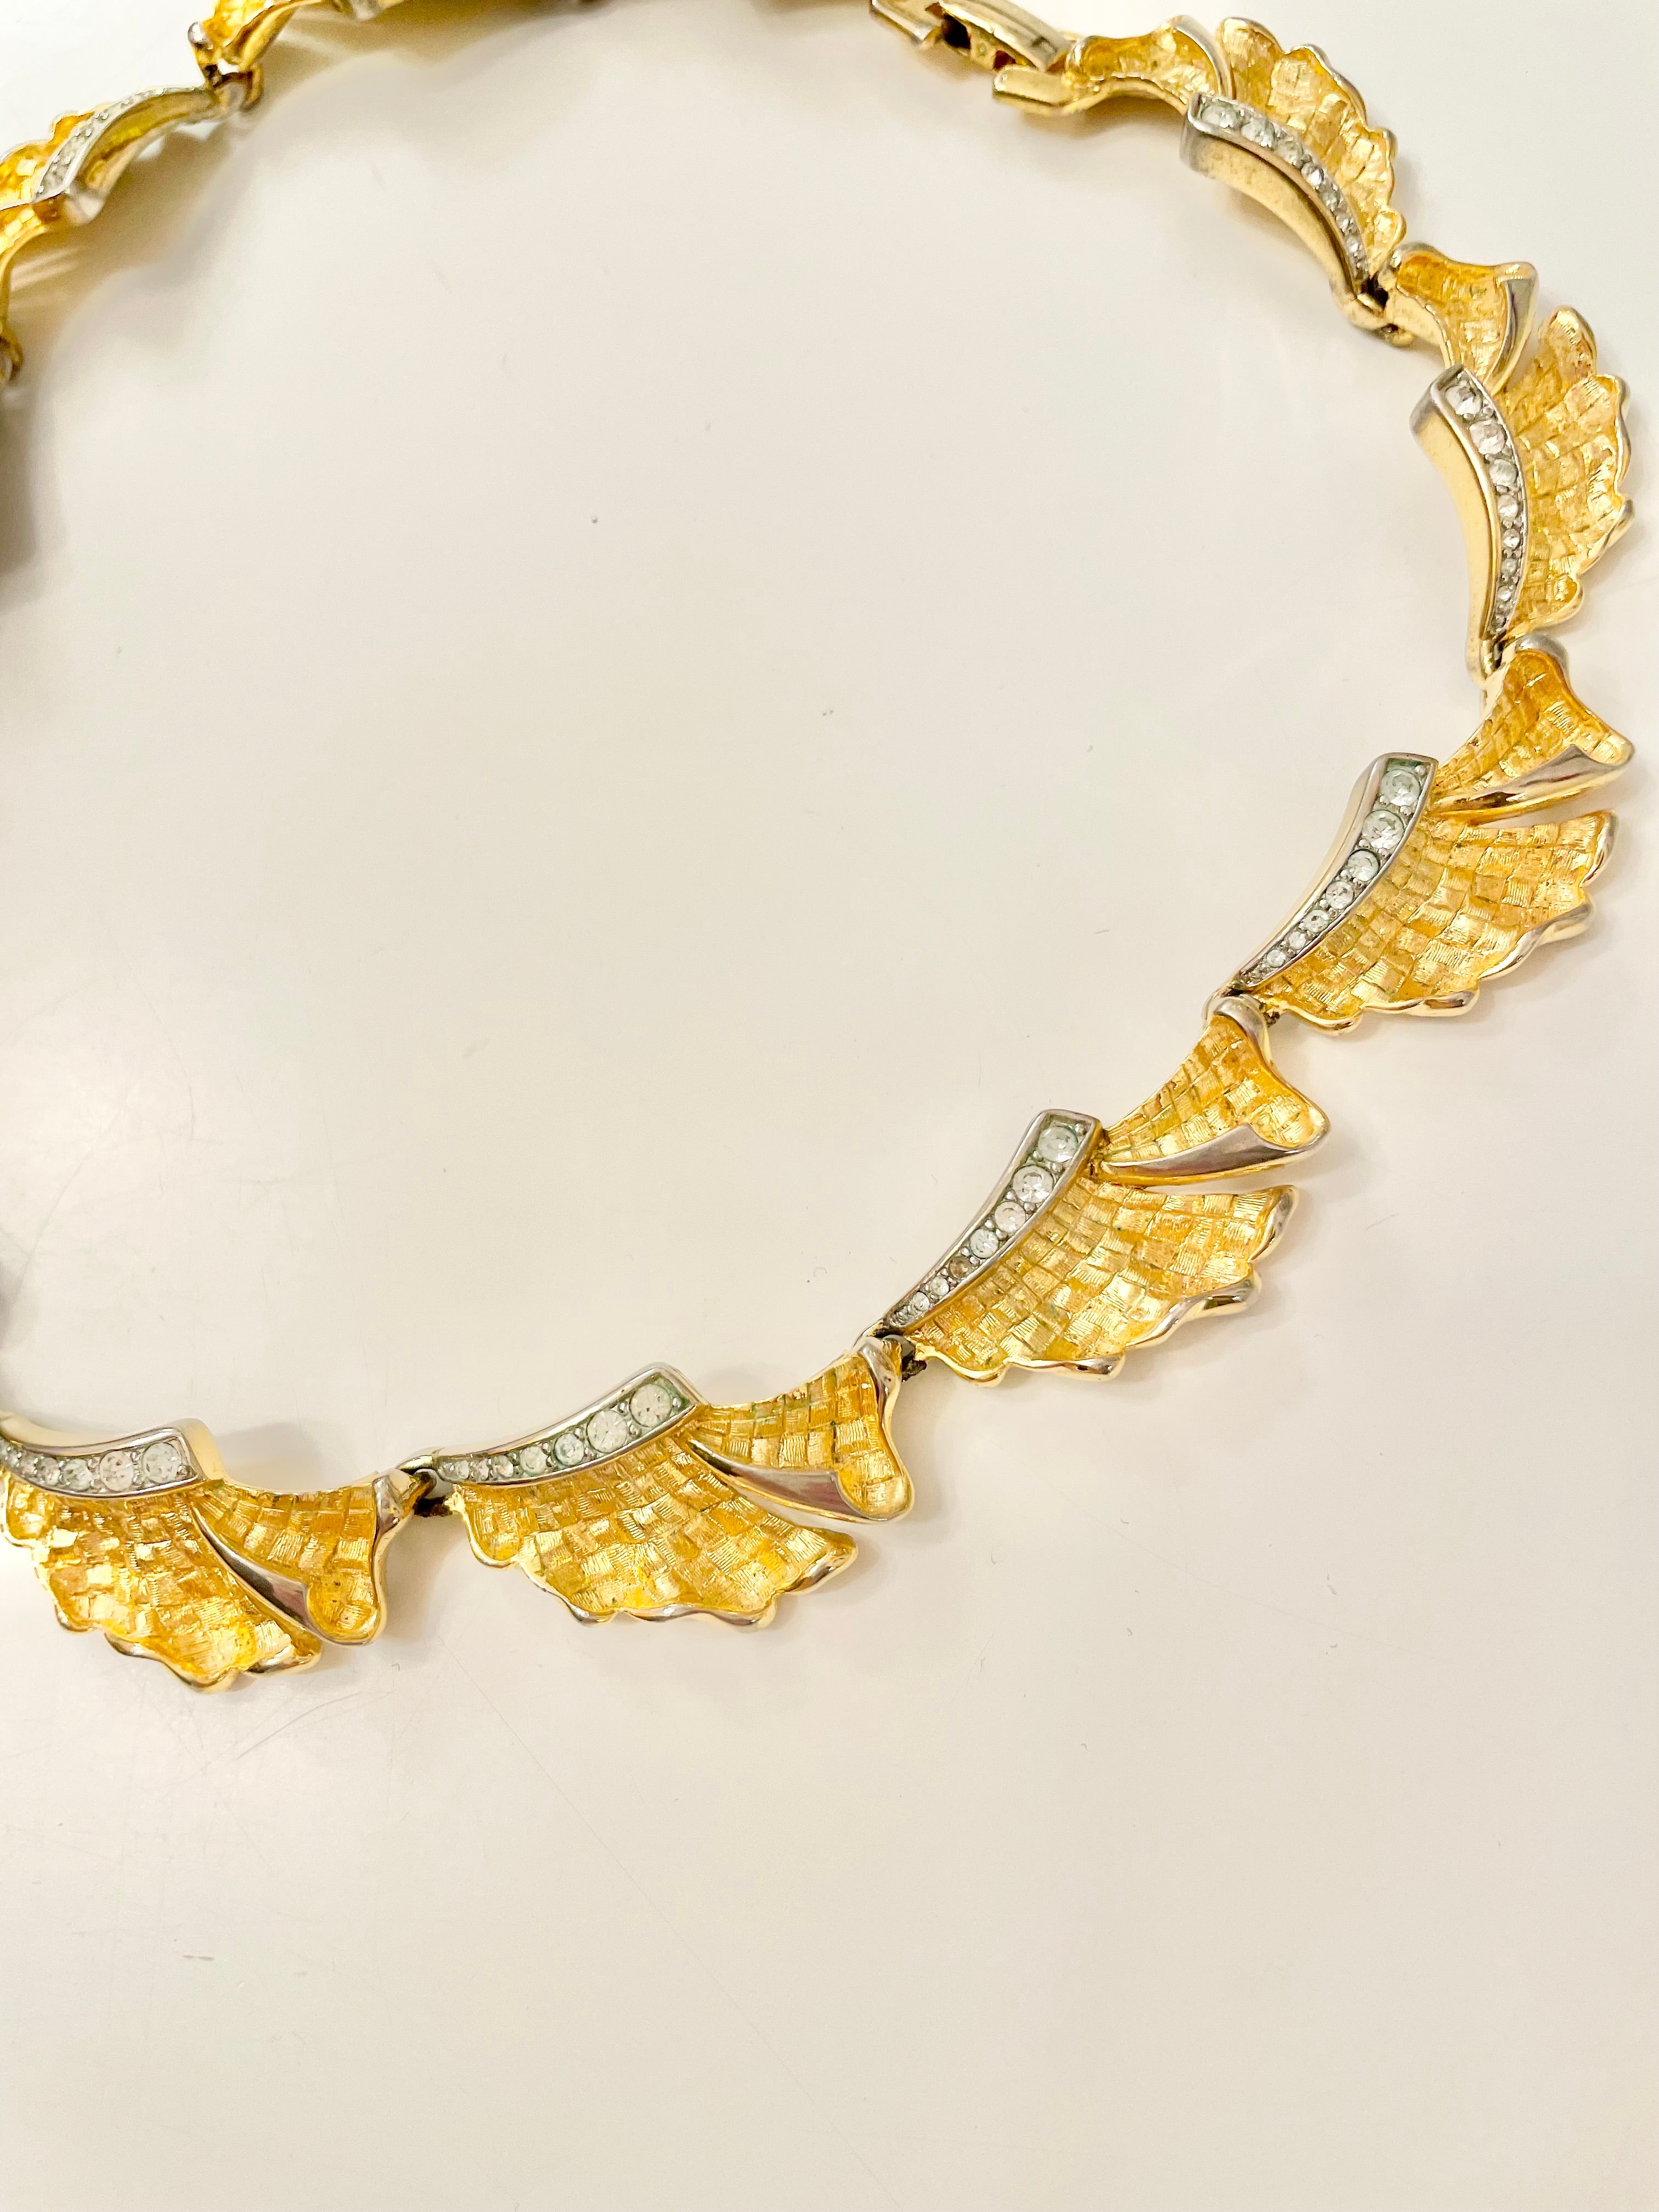 Vintage 1960's Socialite gold and pave set stone collar necklace. A rare beauty!